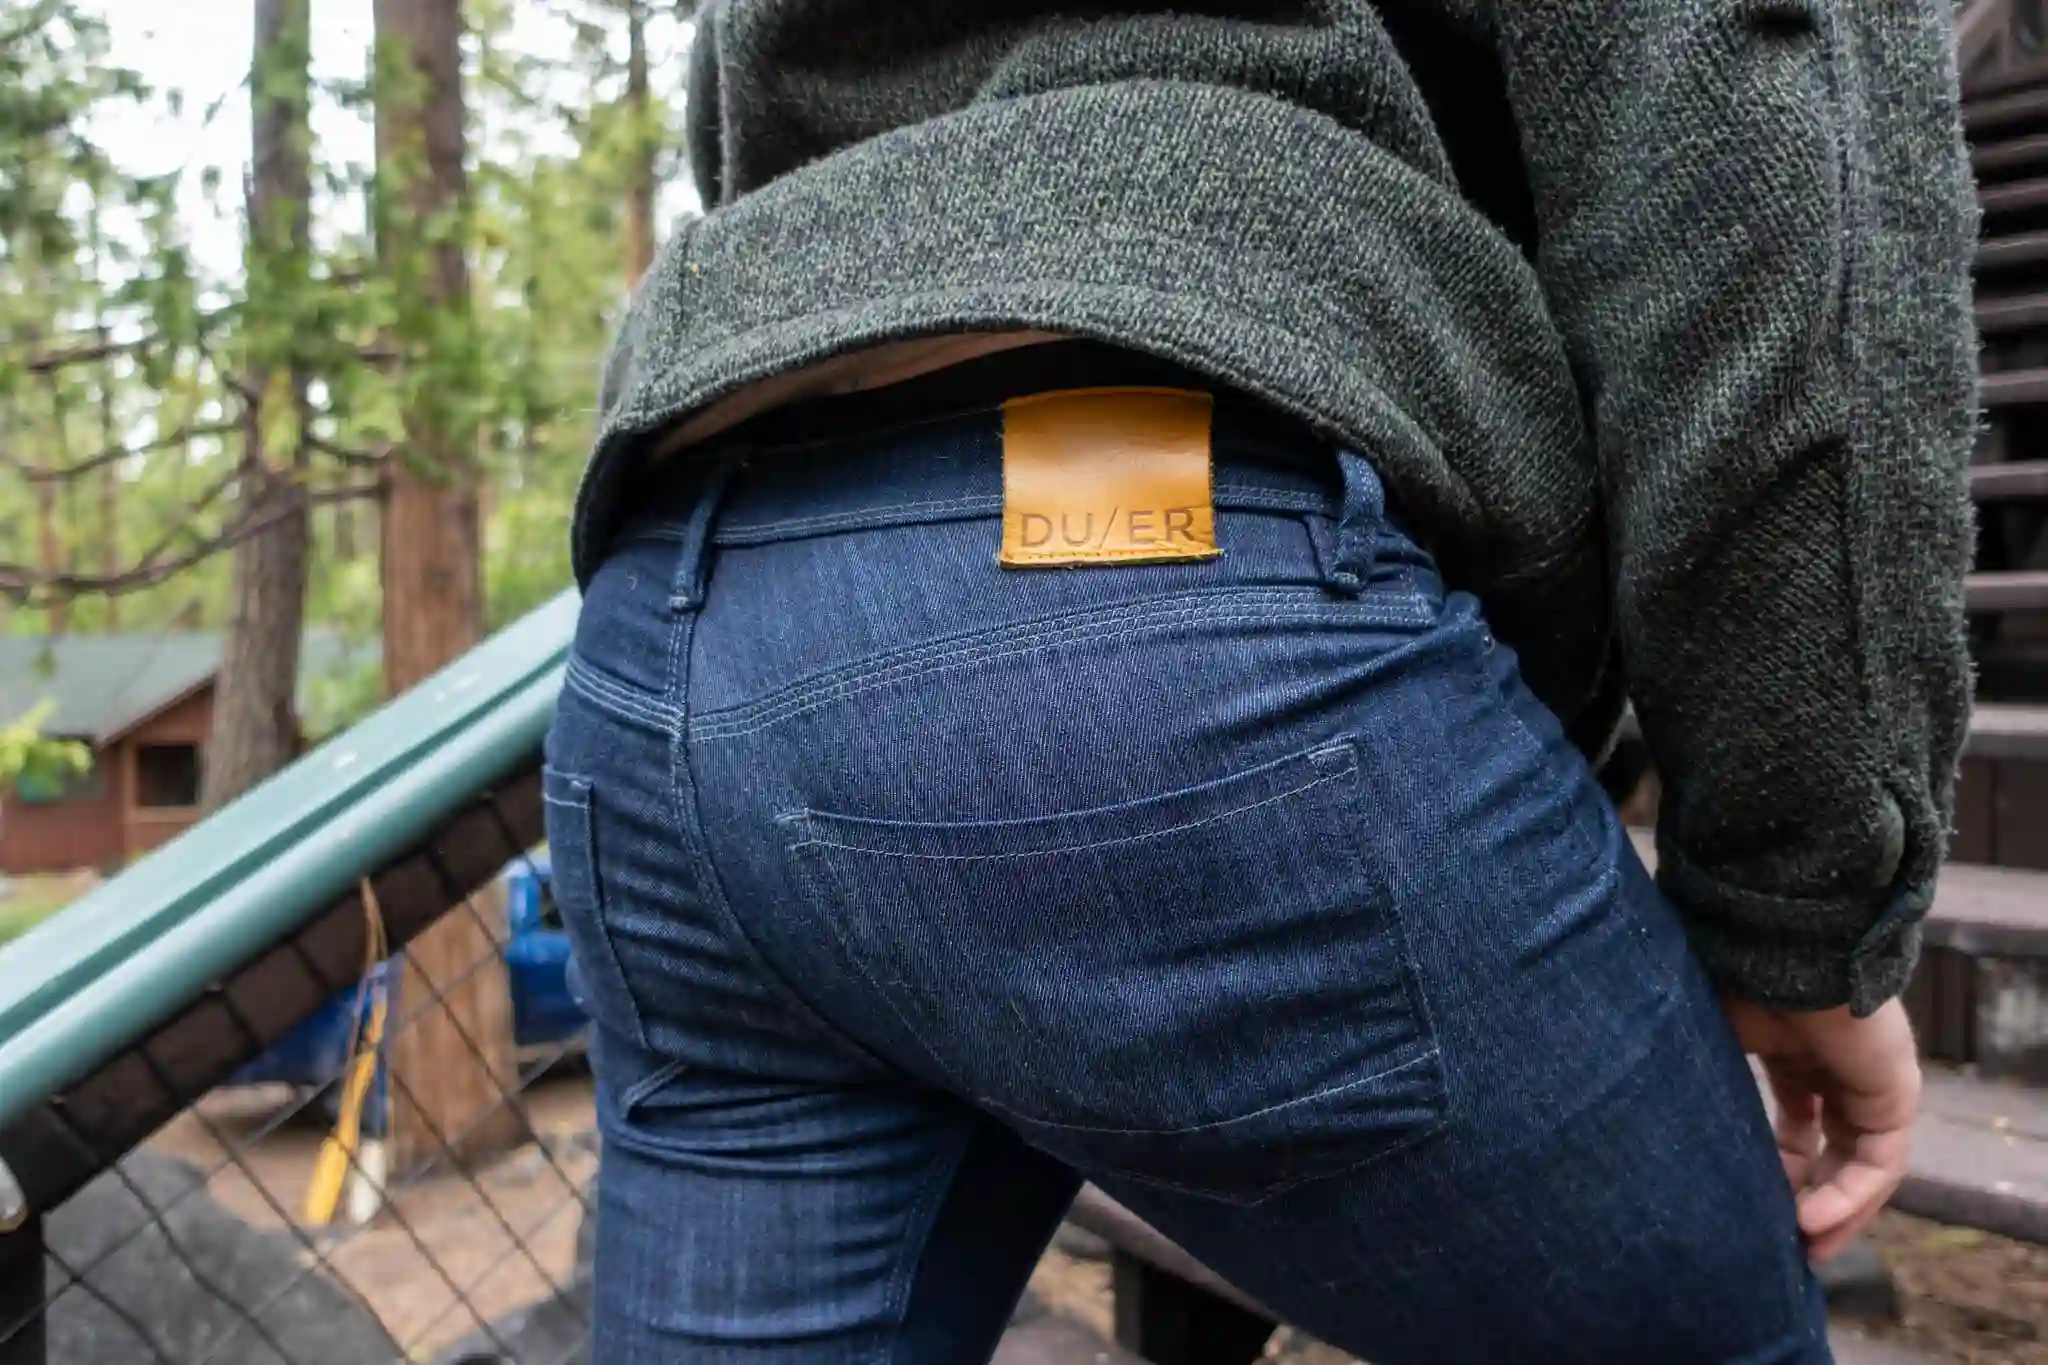 https://thedailygrog.com/content/images/size/w1200/2022/12/duer-denim-review.webp